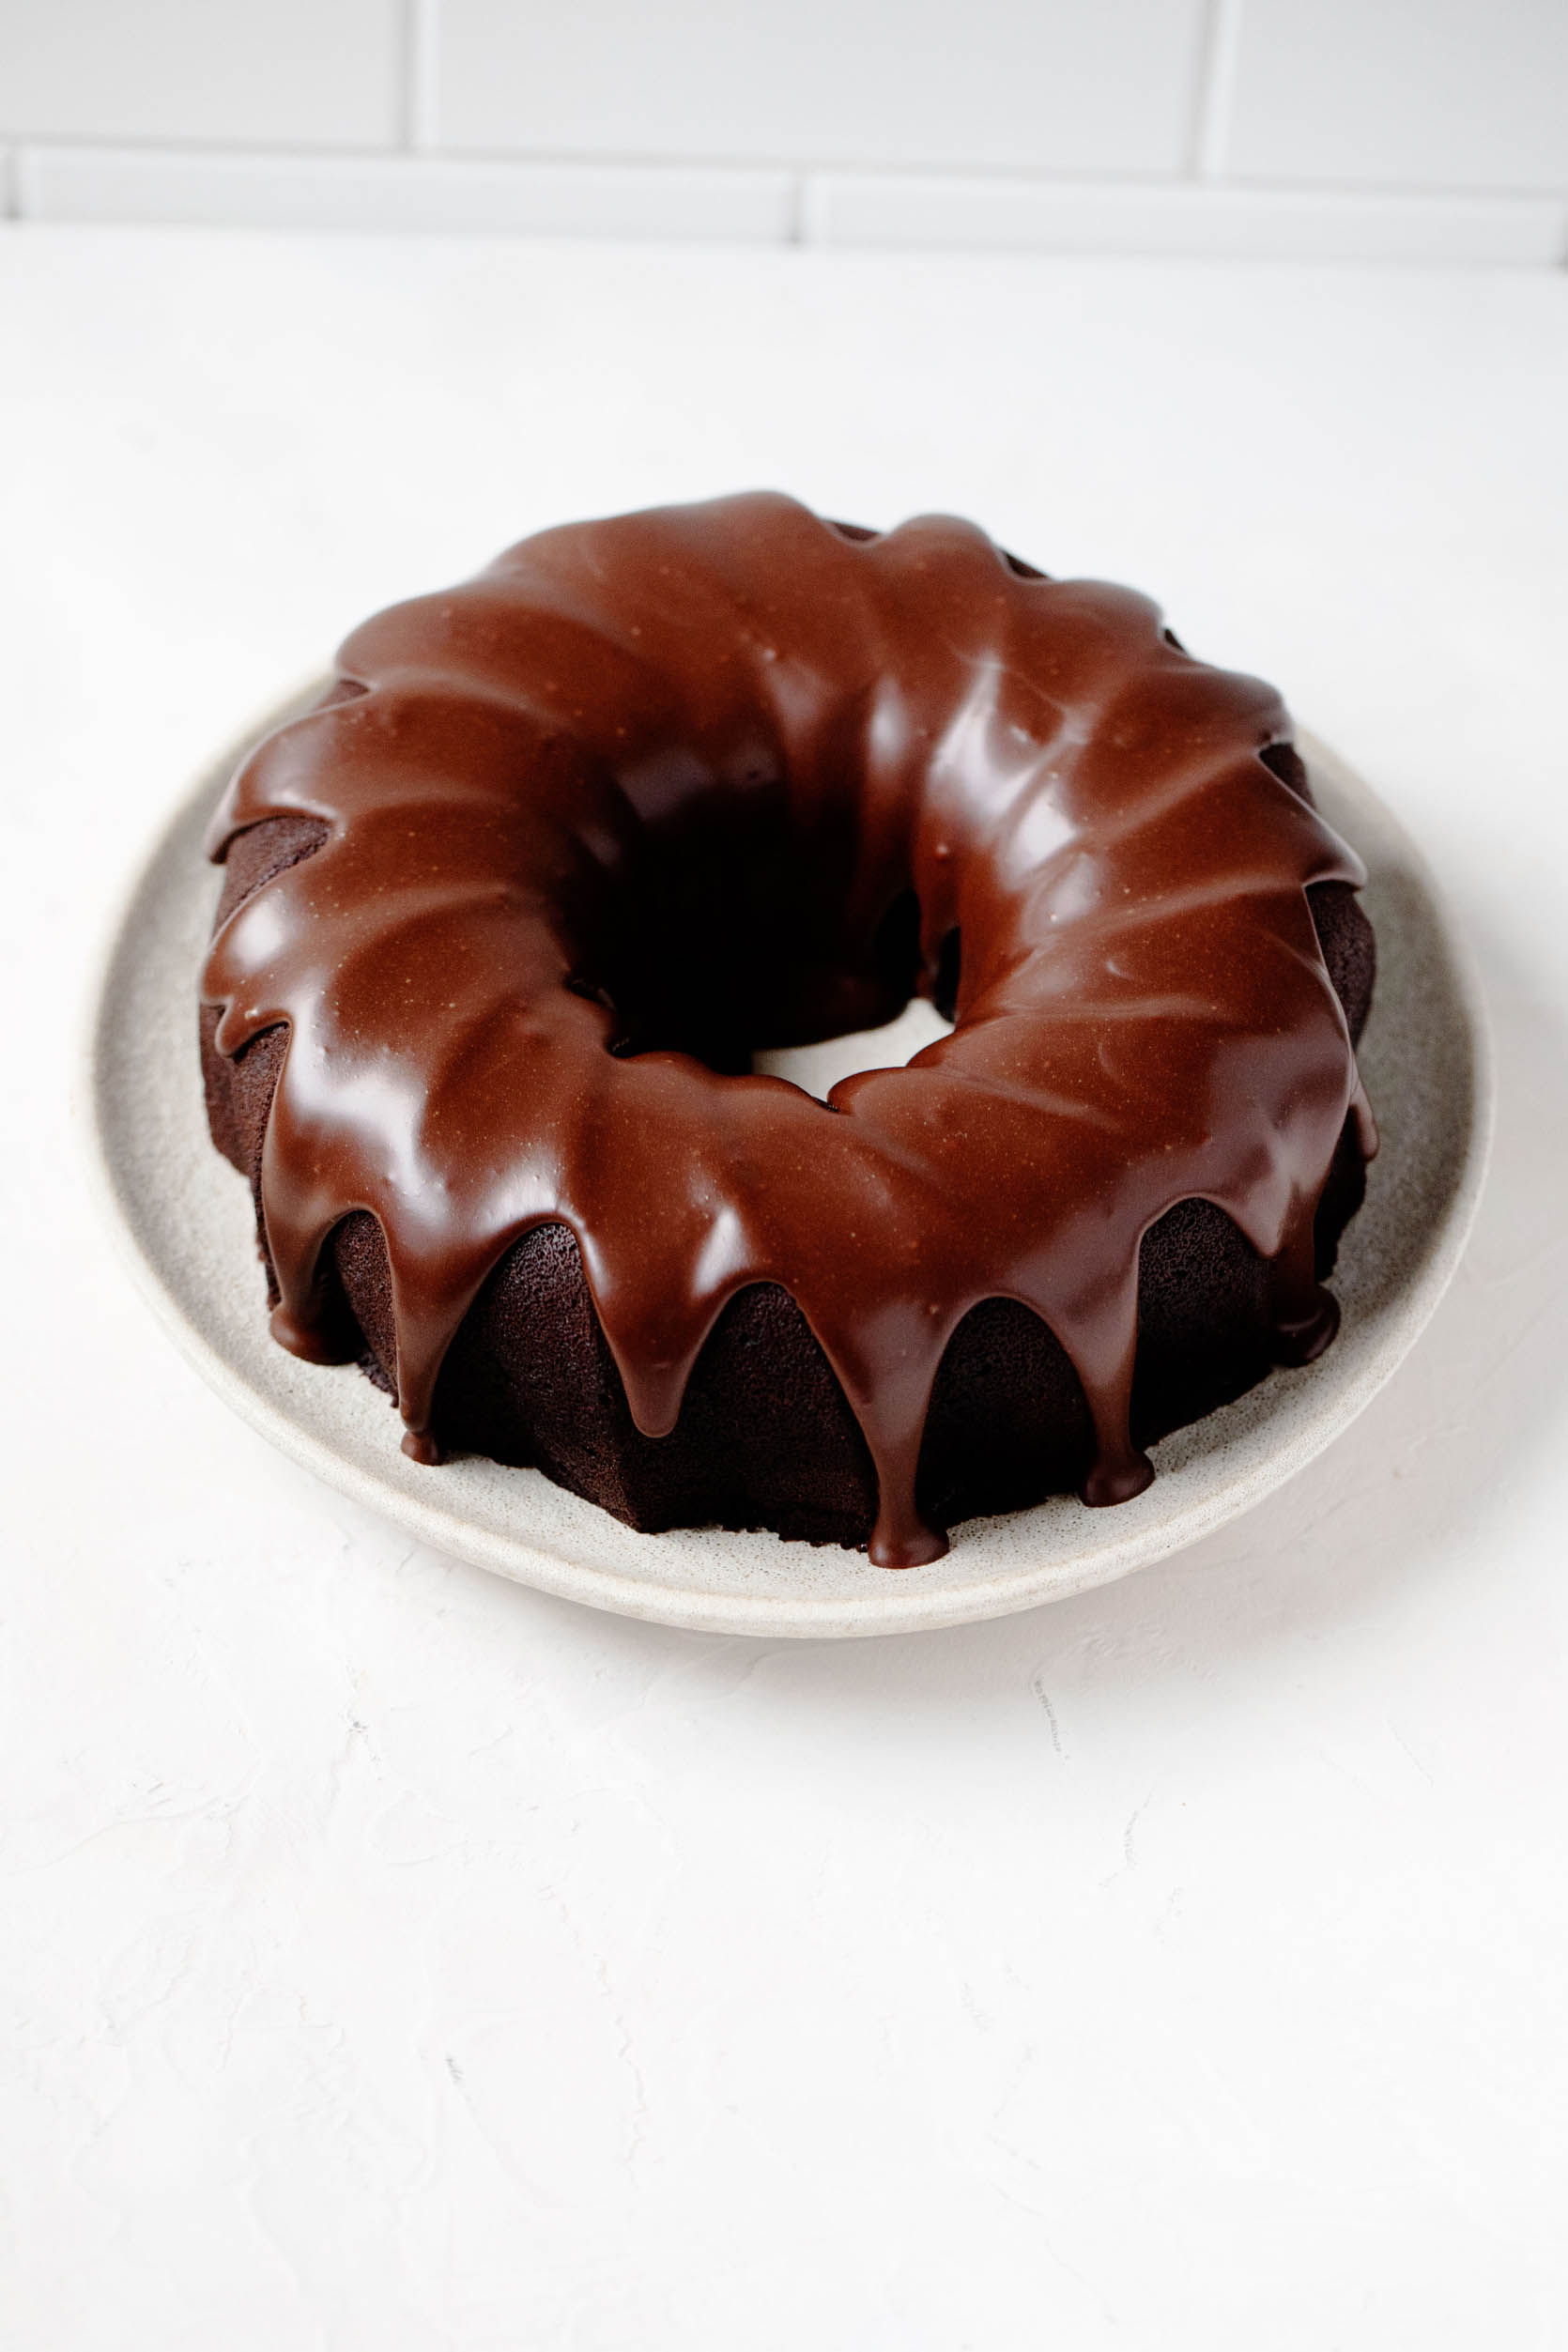 A vegan baked dessert has been recently covered in a glossy, thick glaze. It's resting on a white serving plate.